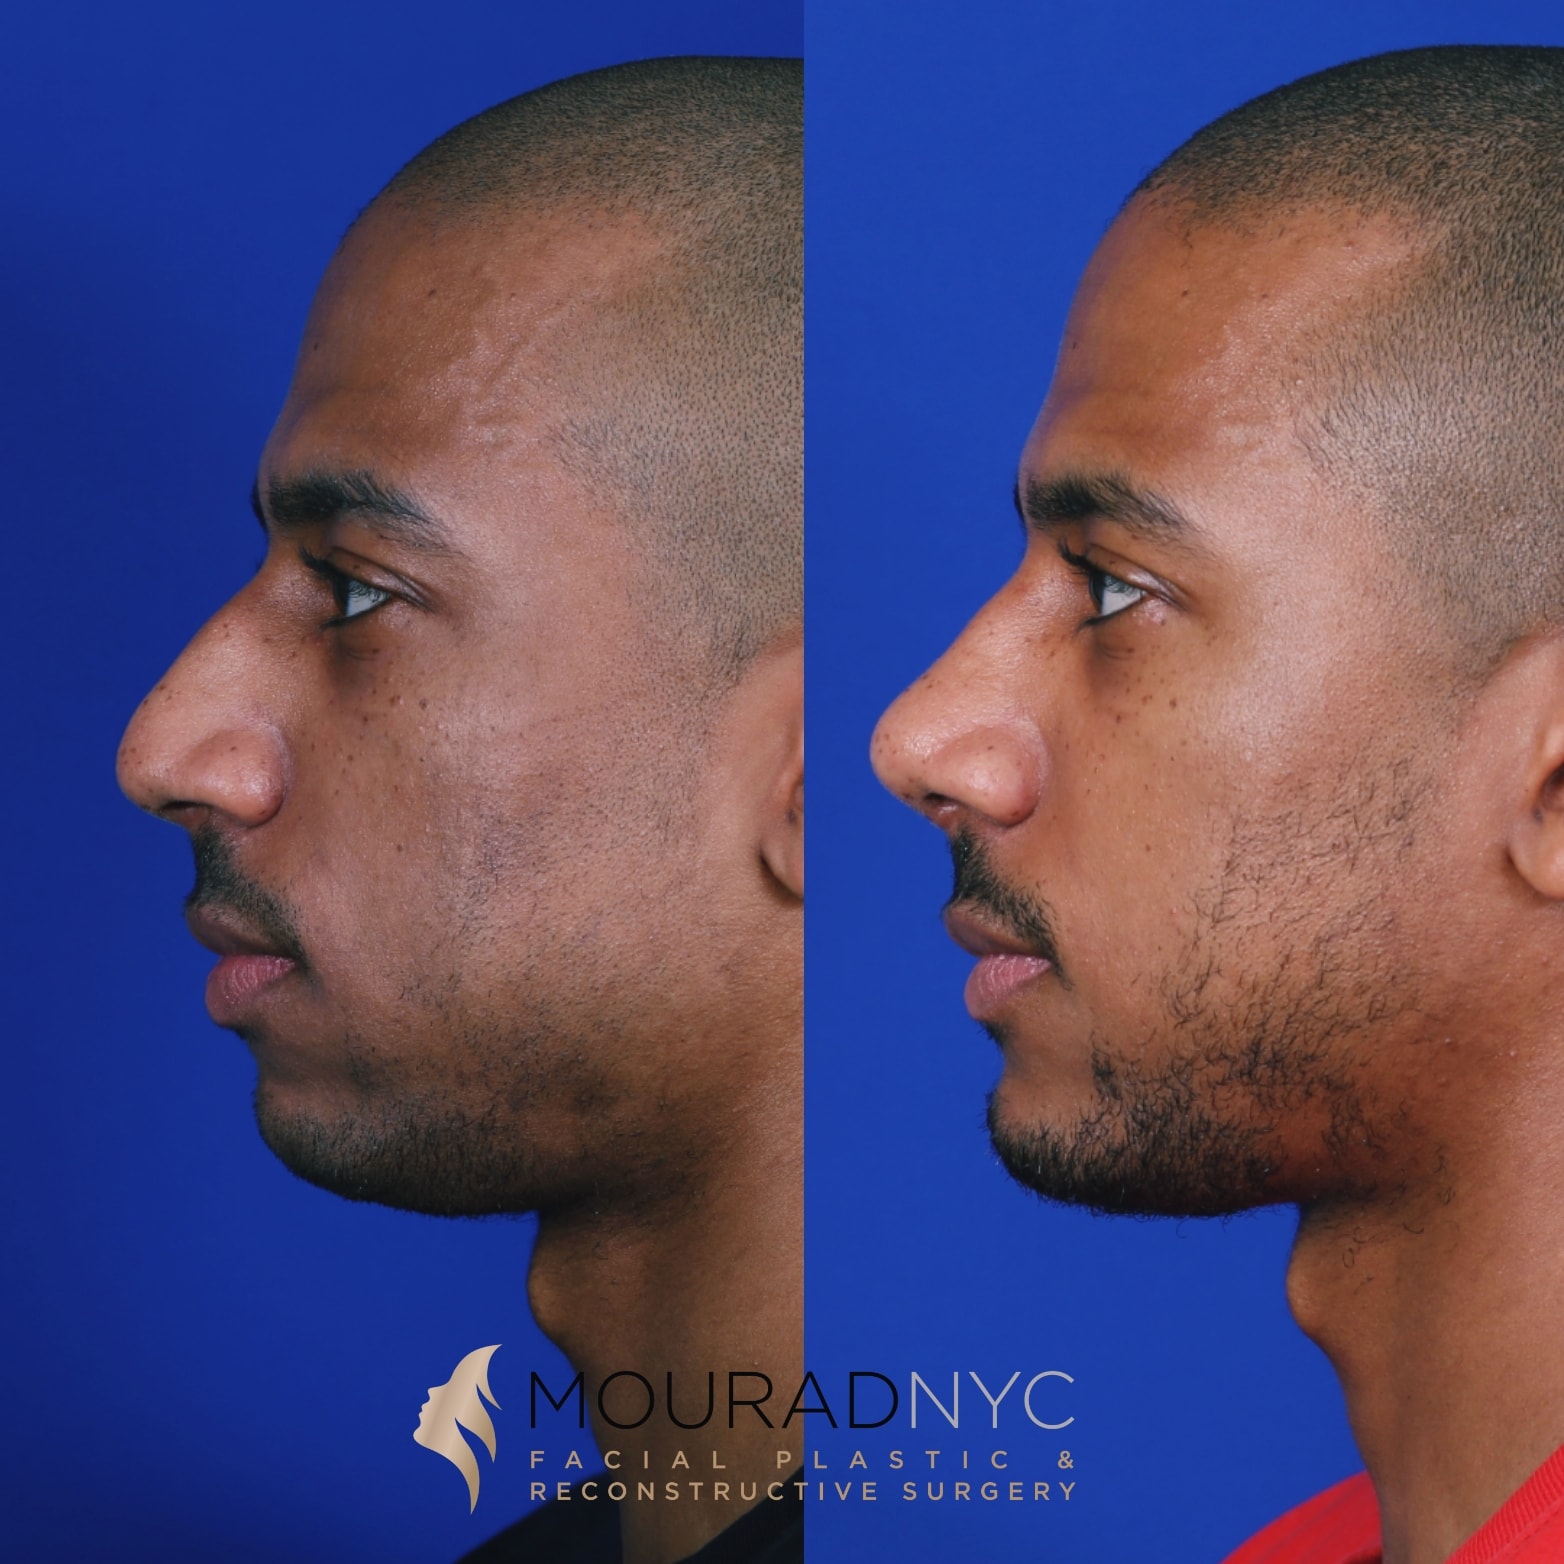 Sliding-Genioplasty-and-Rhinoplasty-Before-and-After.jpg